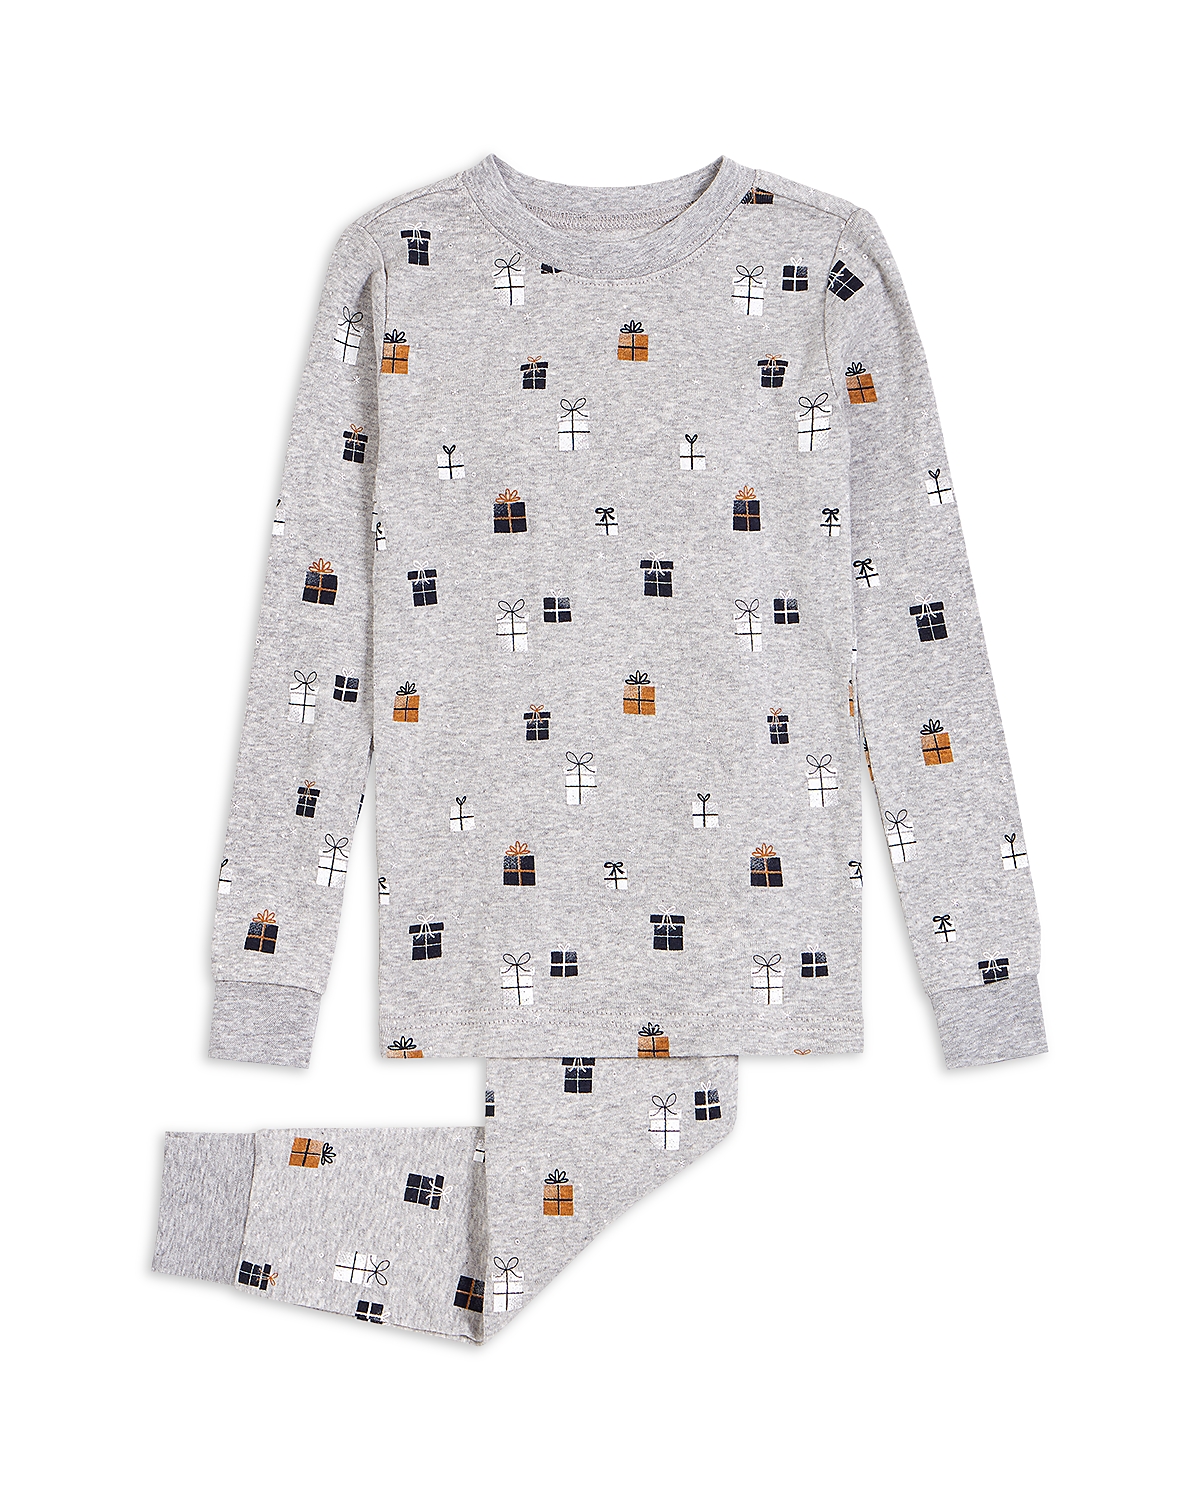 Firsts by petit lem Unisex All Wrapped Up Pajamas - Baby size 12m and 18m $10